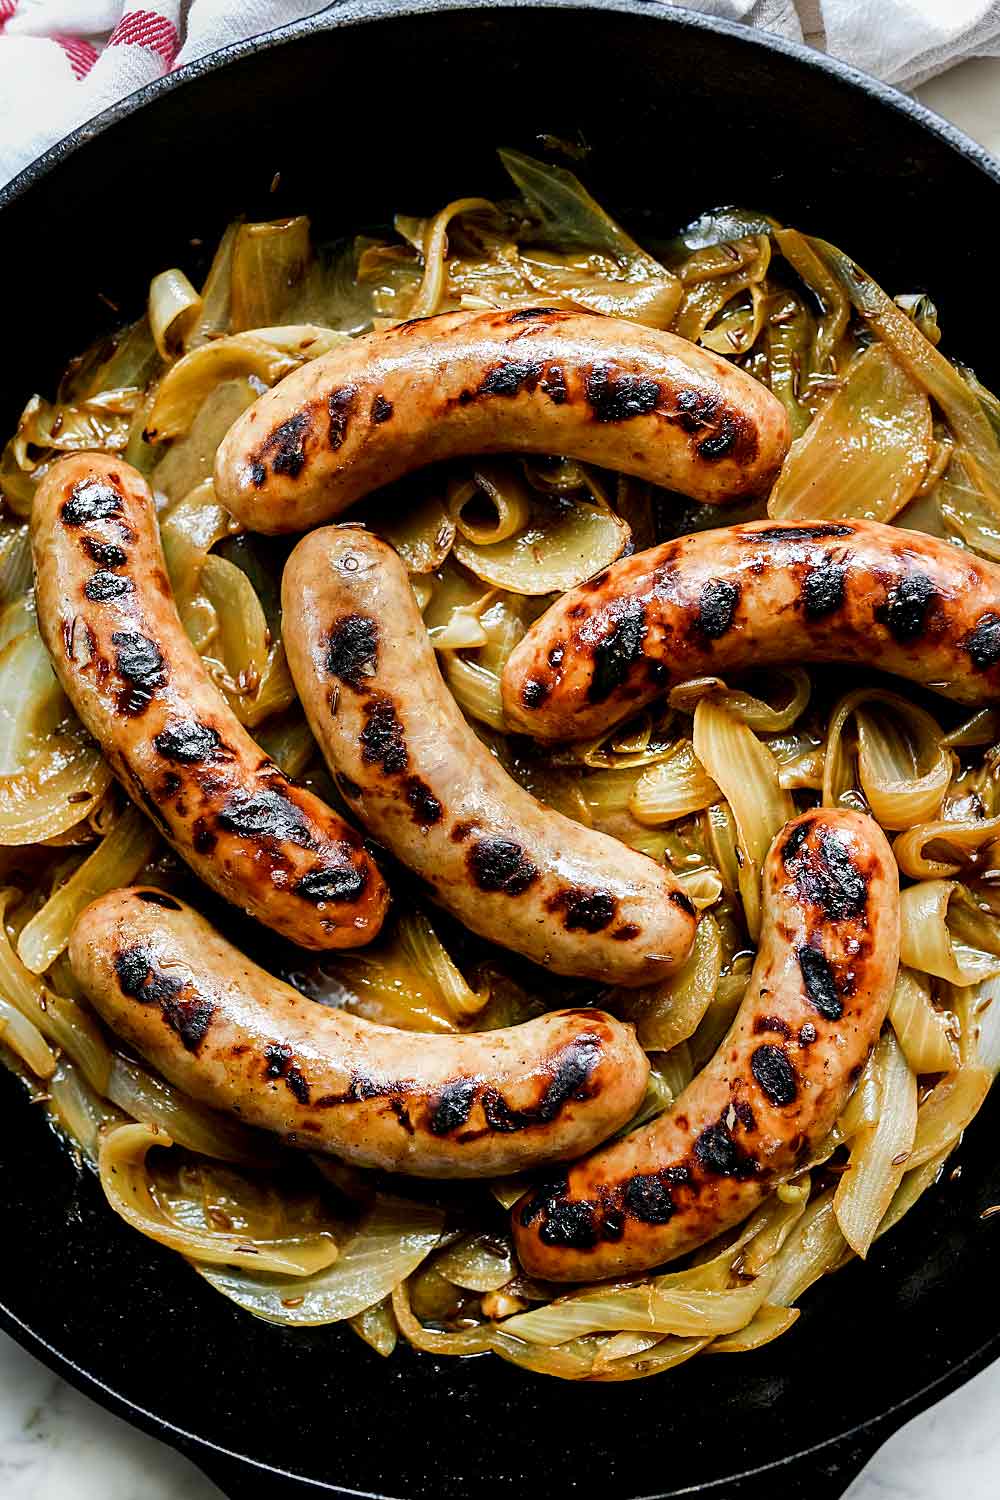 Grilling Brats the German Way - My Dinner